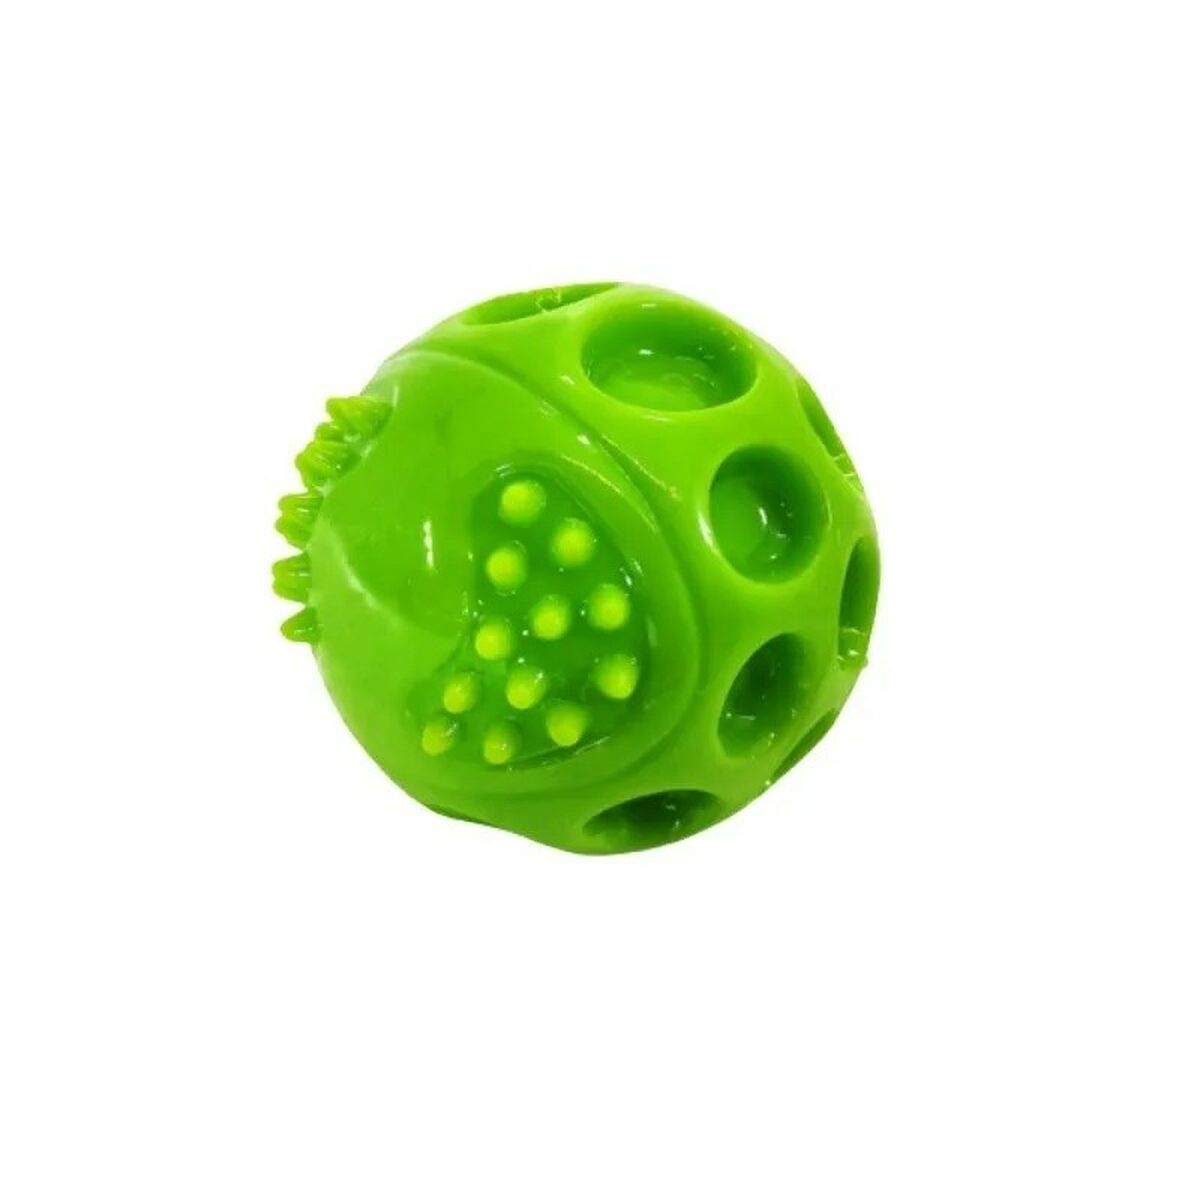 Dog toy Hilton 104-404012-00 Blue Green Natural rubber (1 Piece)